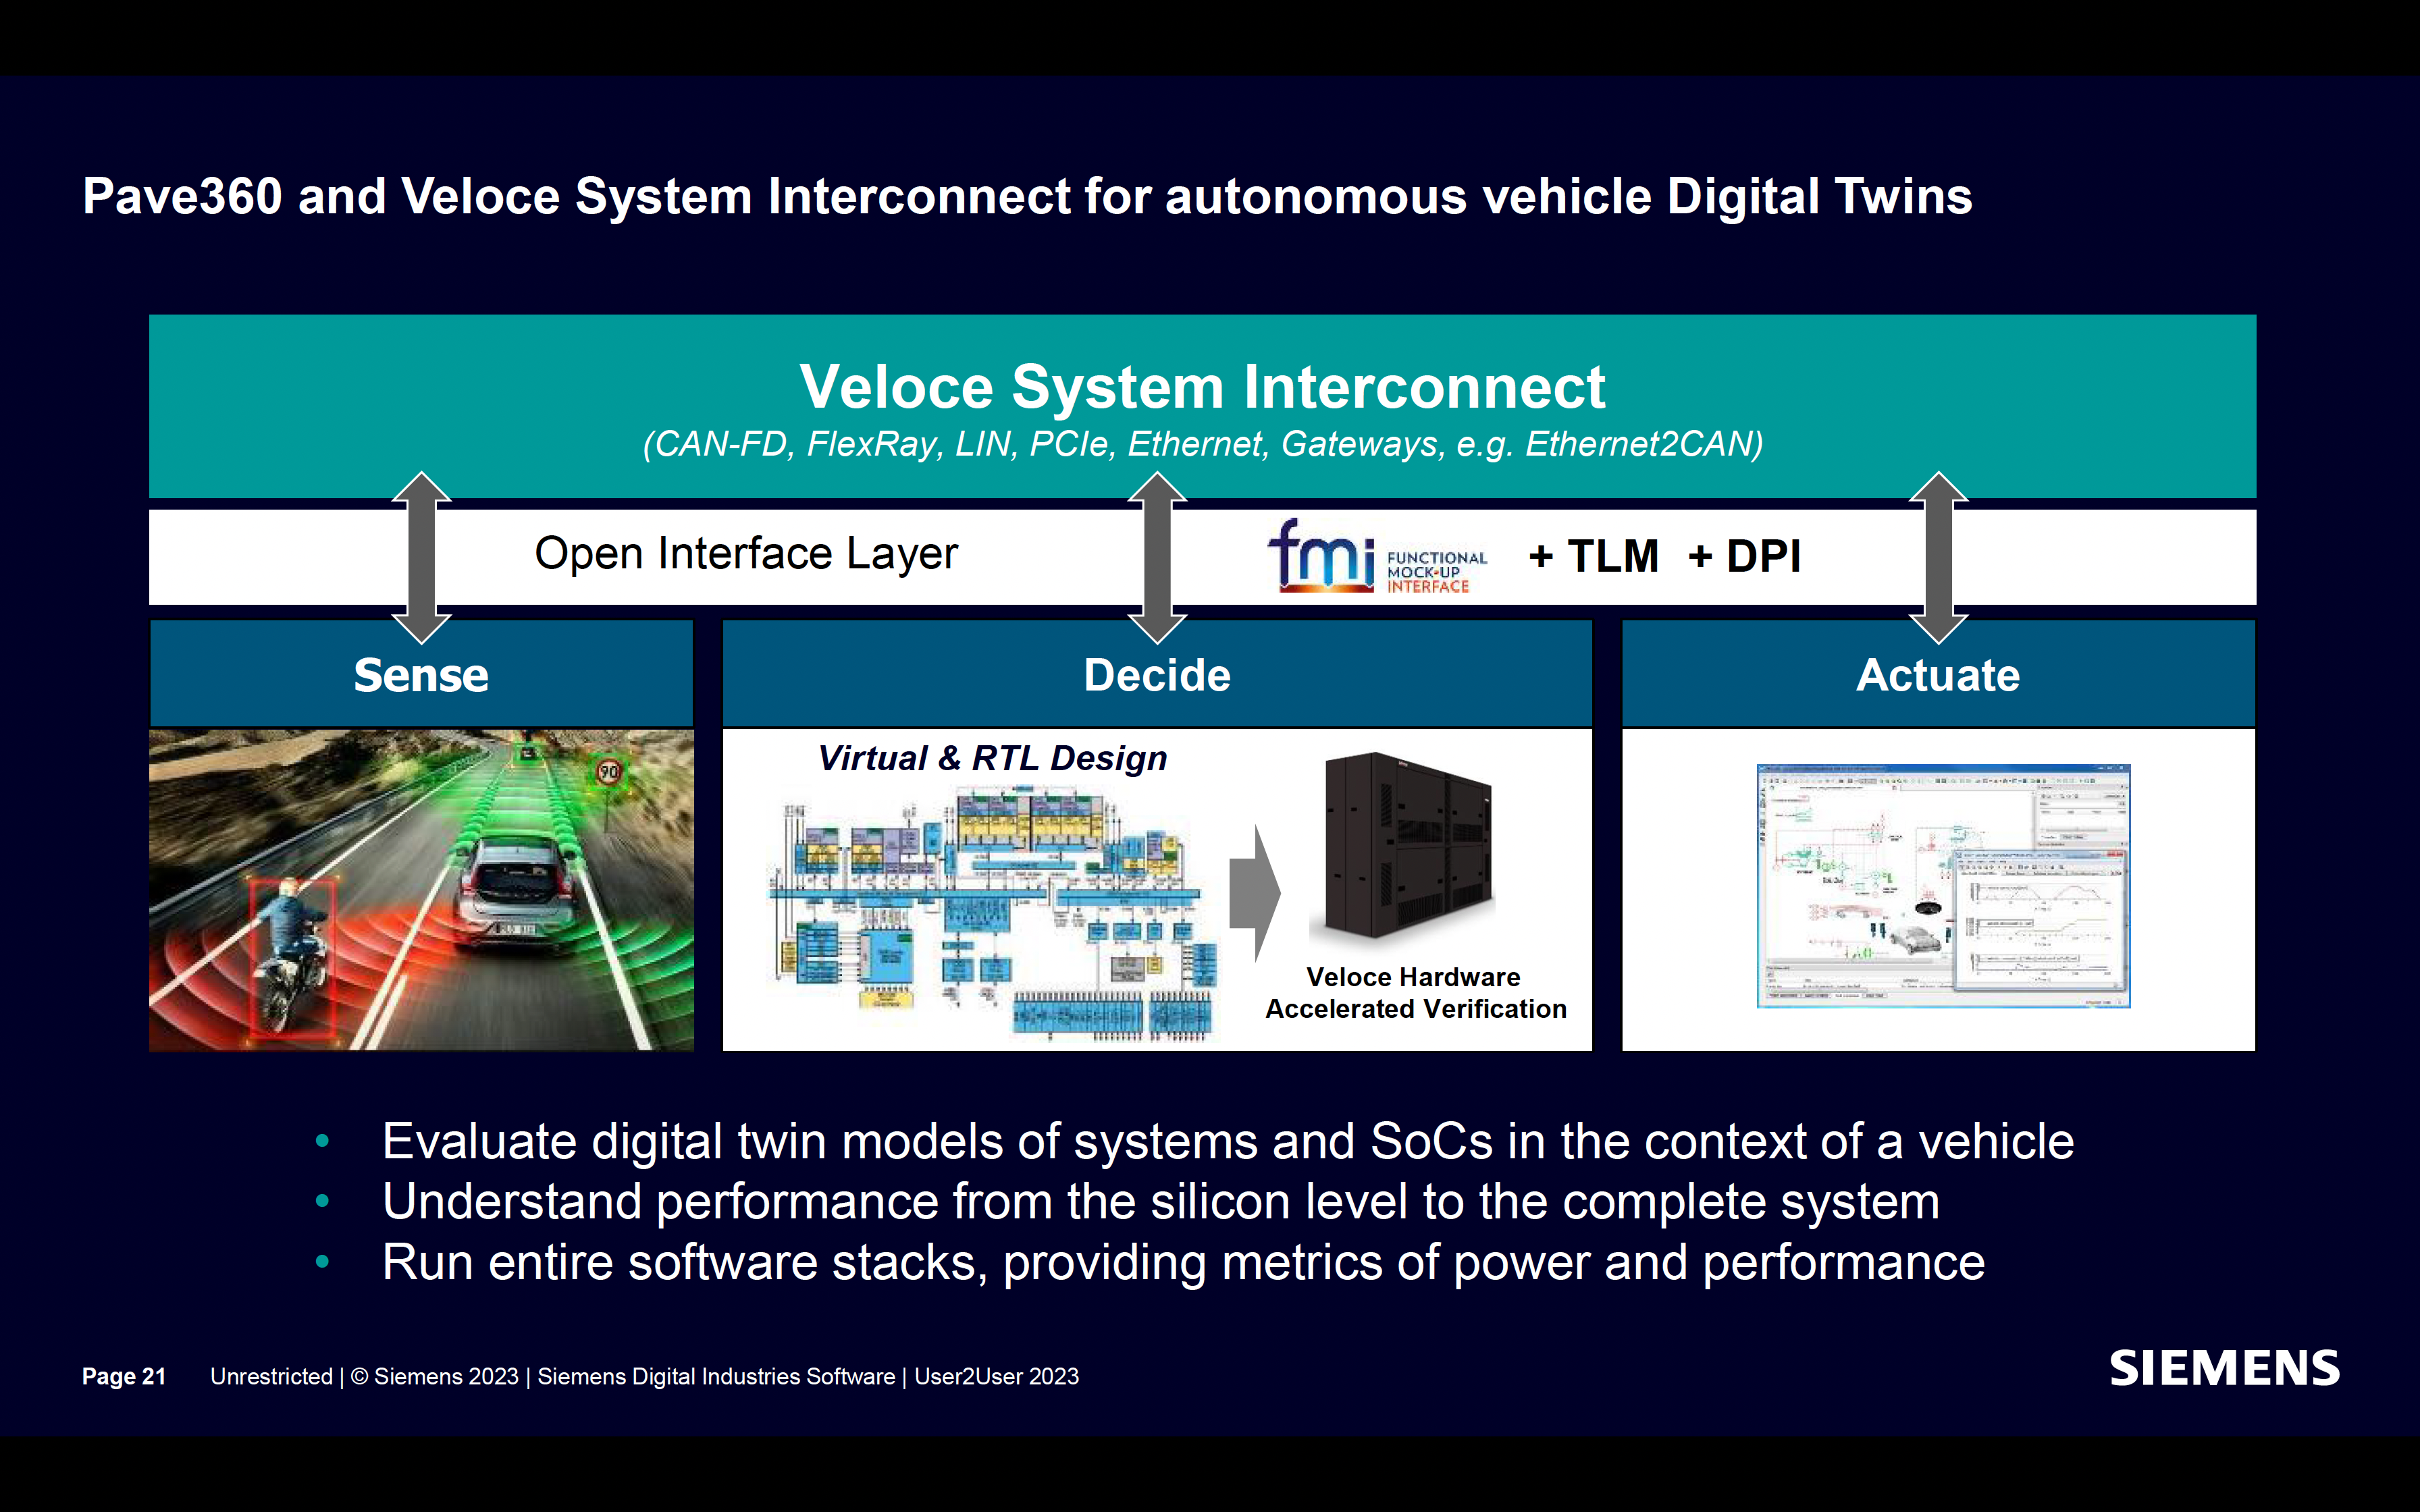 Pave360 and Veloce System Interconnect for Autonomous Vehicle Digital Twins siemens eda 